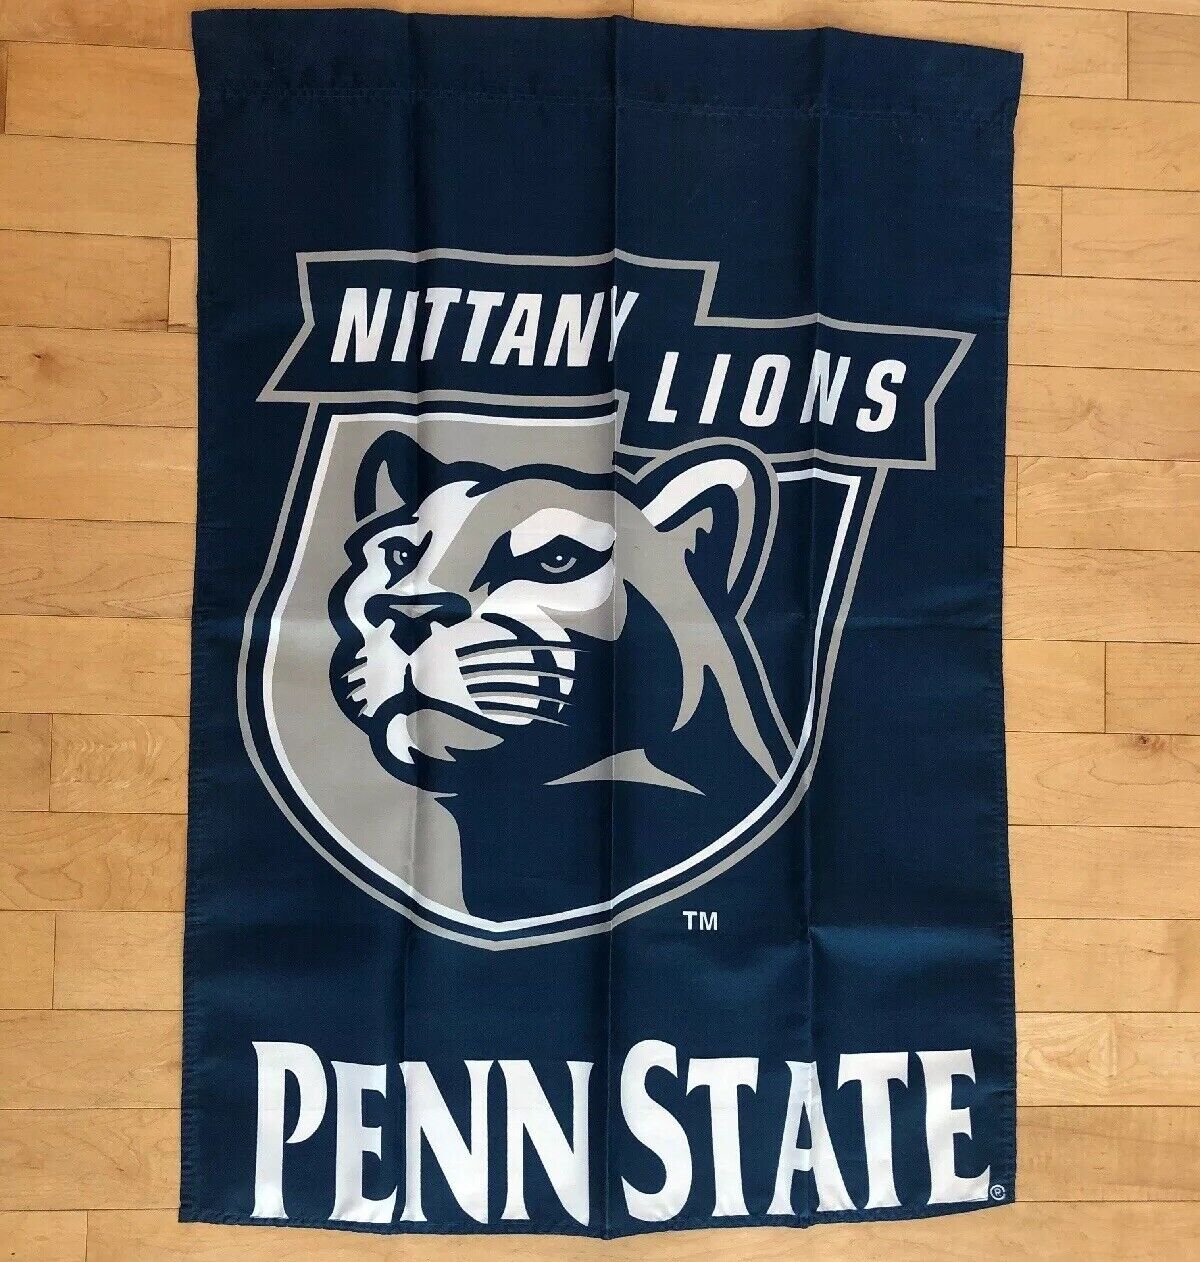 PENN STATE Nitany Lions Large Cloth Banner 29”x42” NCAA